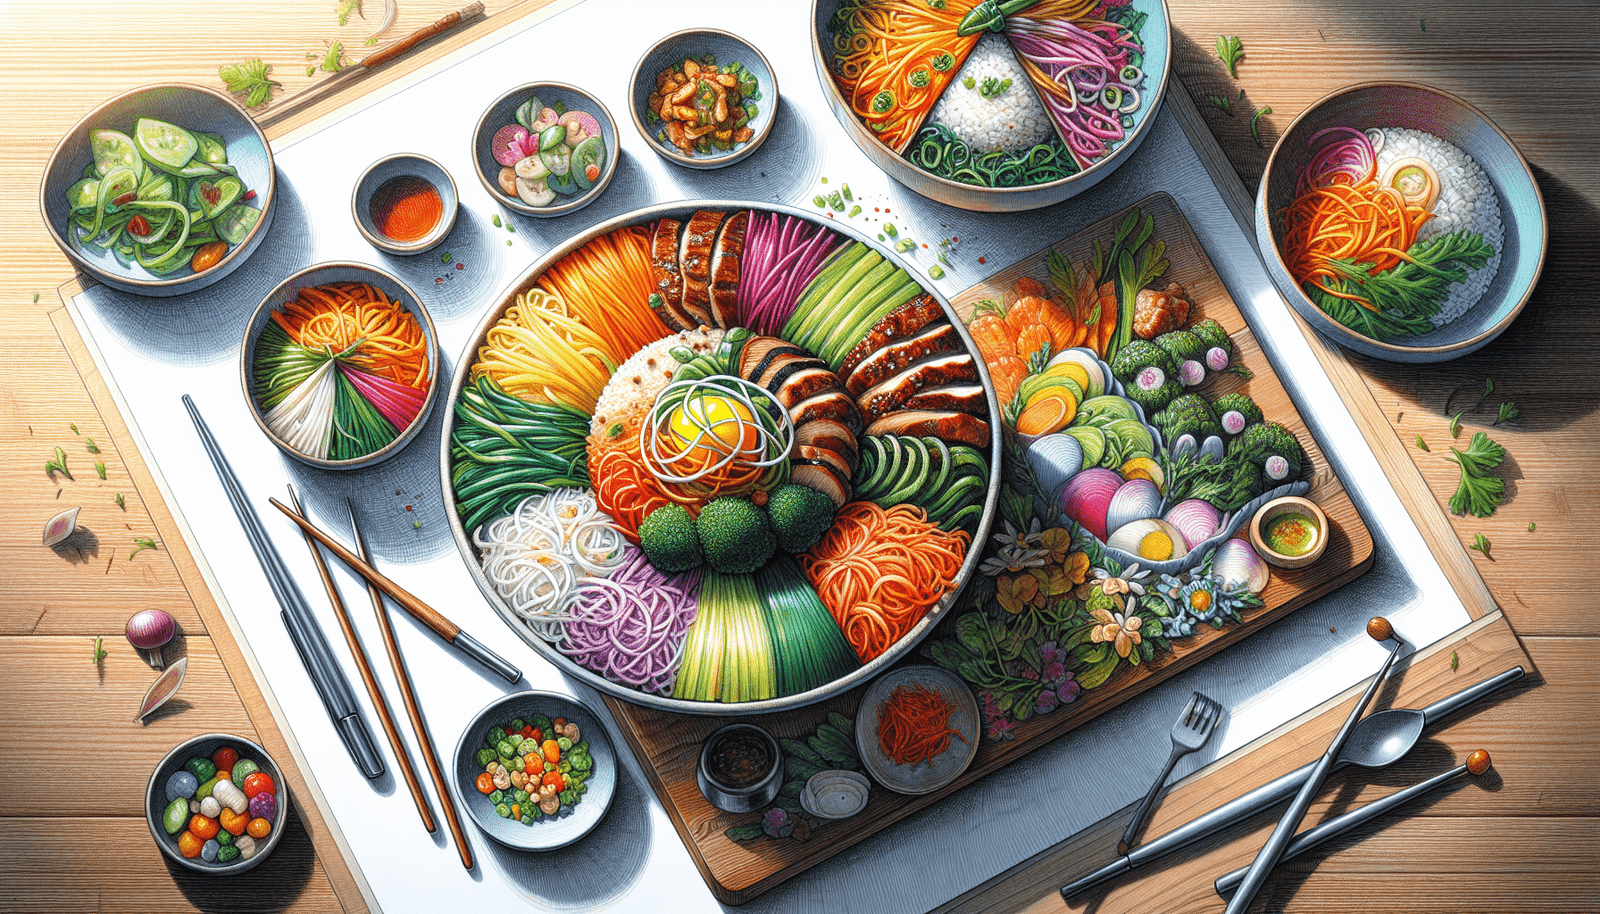 What Role Does Food Presentation And Aesthetics Play In Current Korean Culinary Trends?